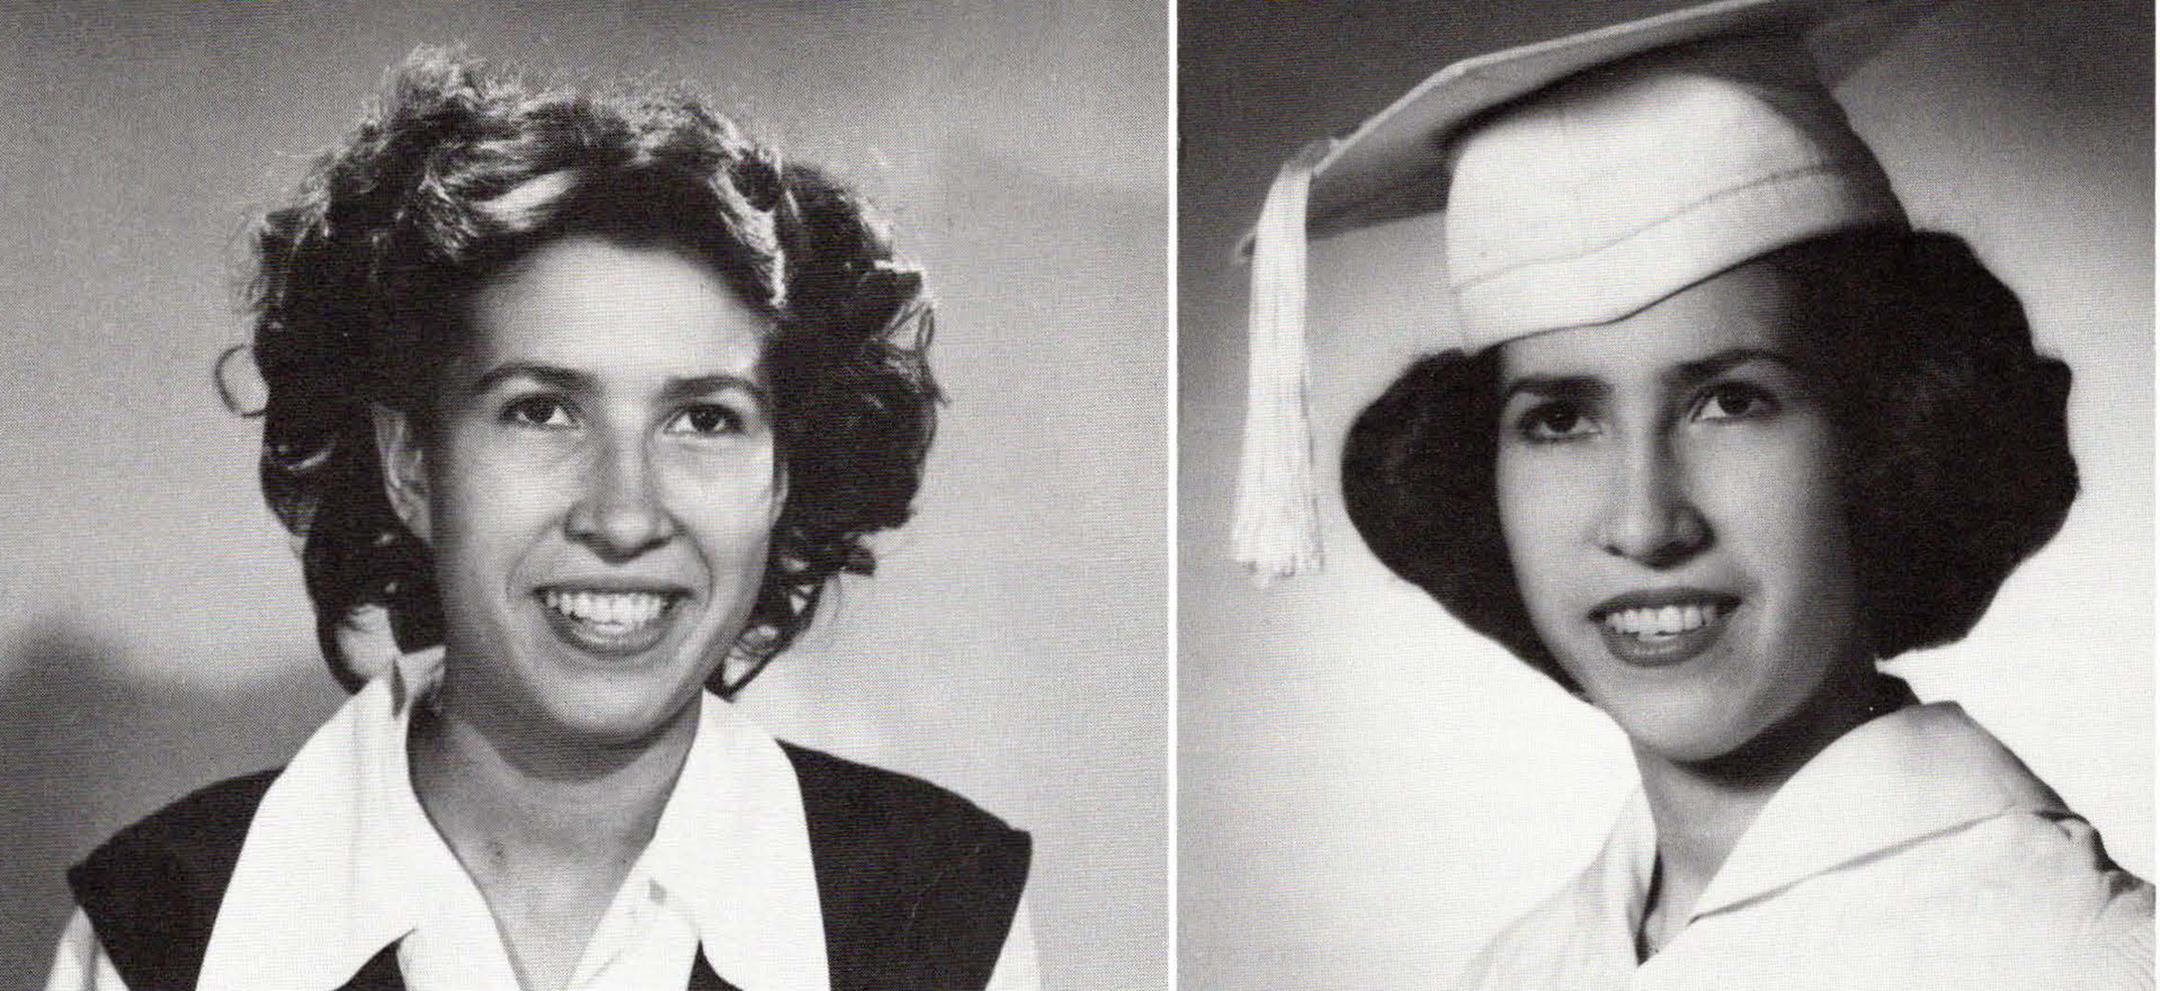 Two black and white photos, side by side, of a smiling young woman, the photo on the left has her posed in a white graduation cap and gown